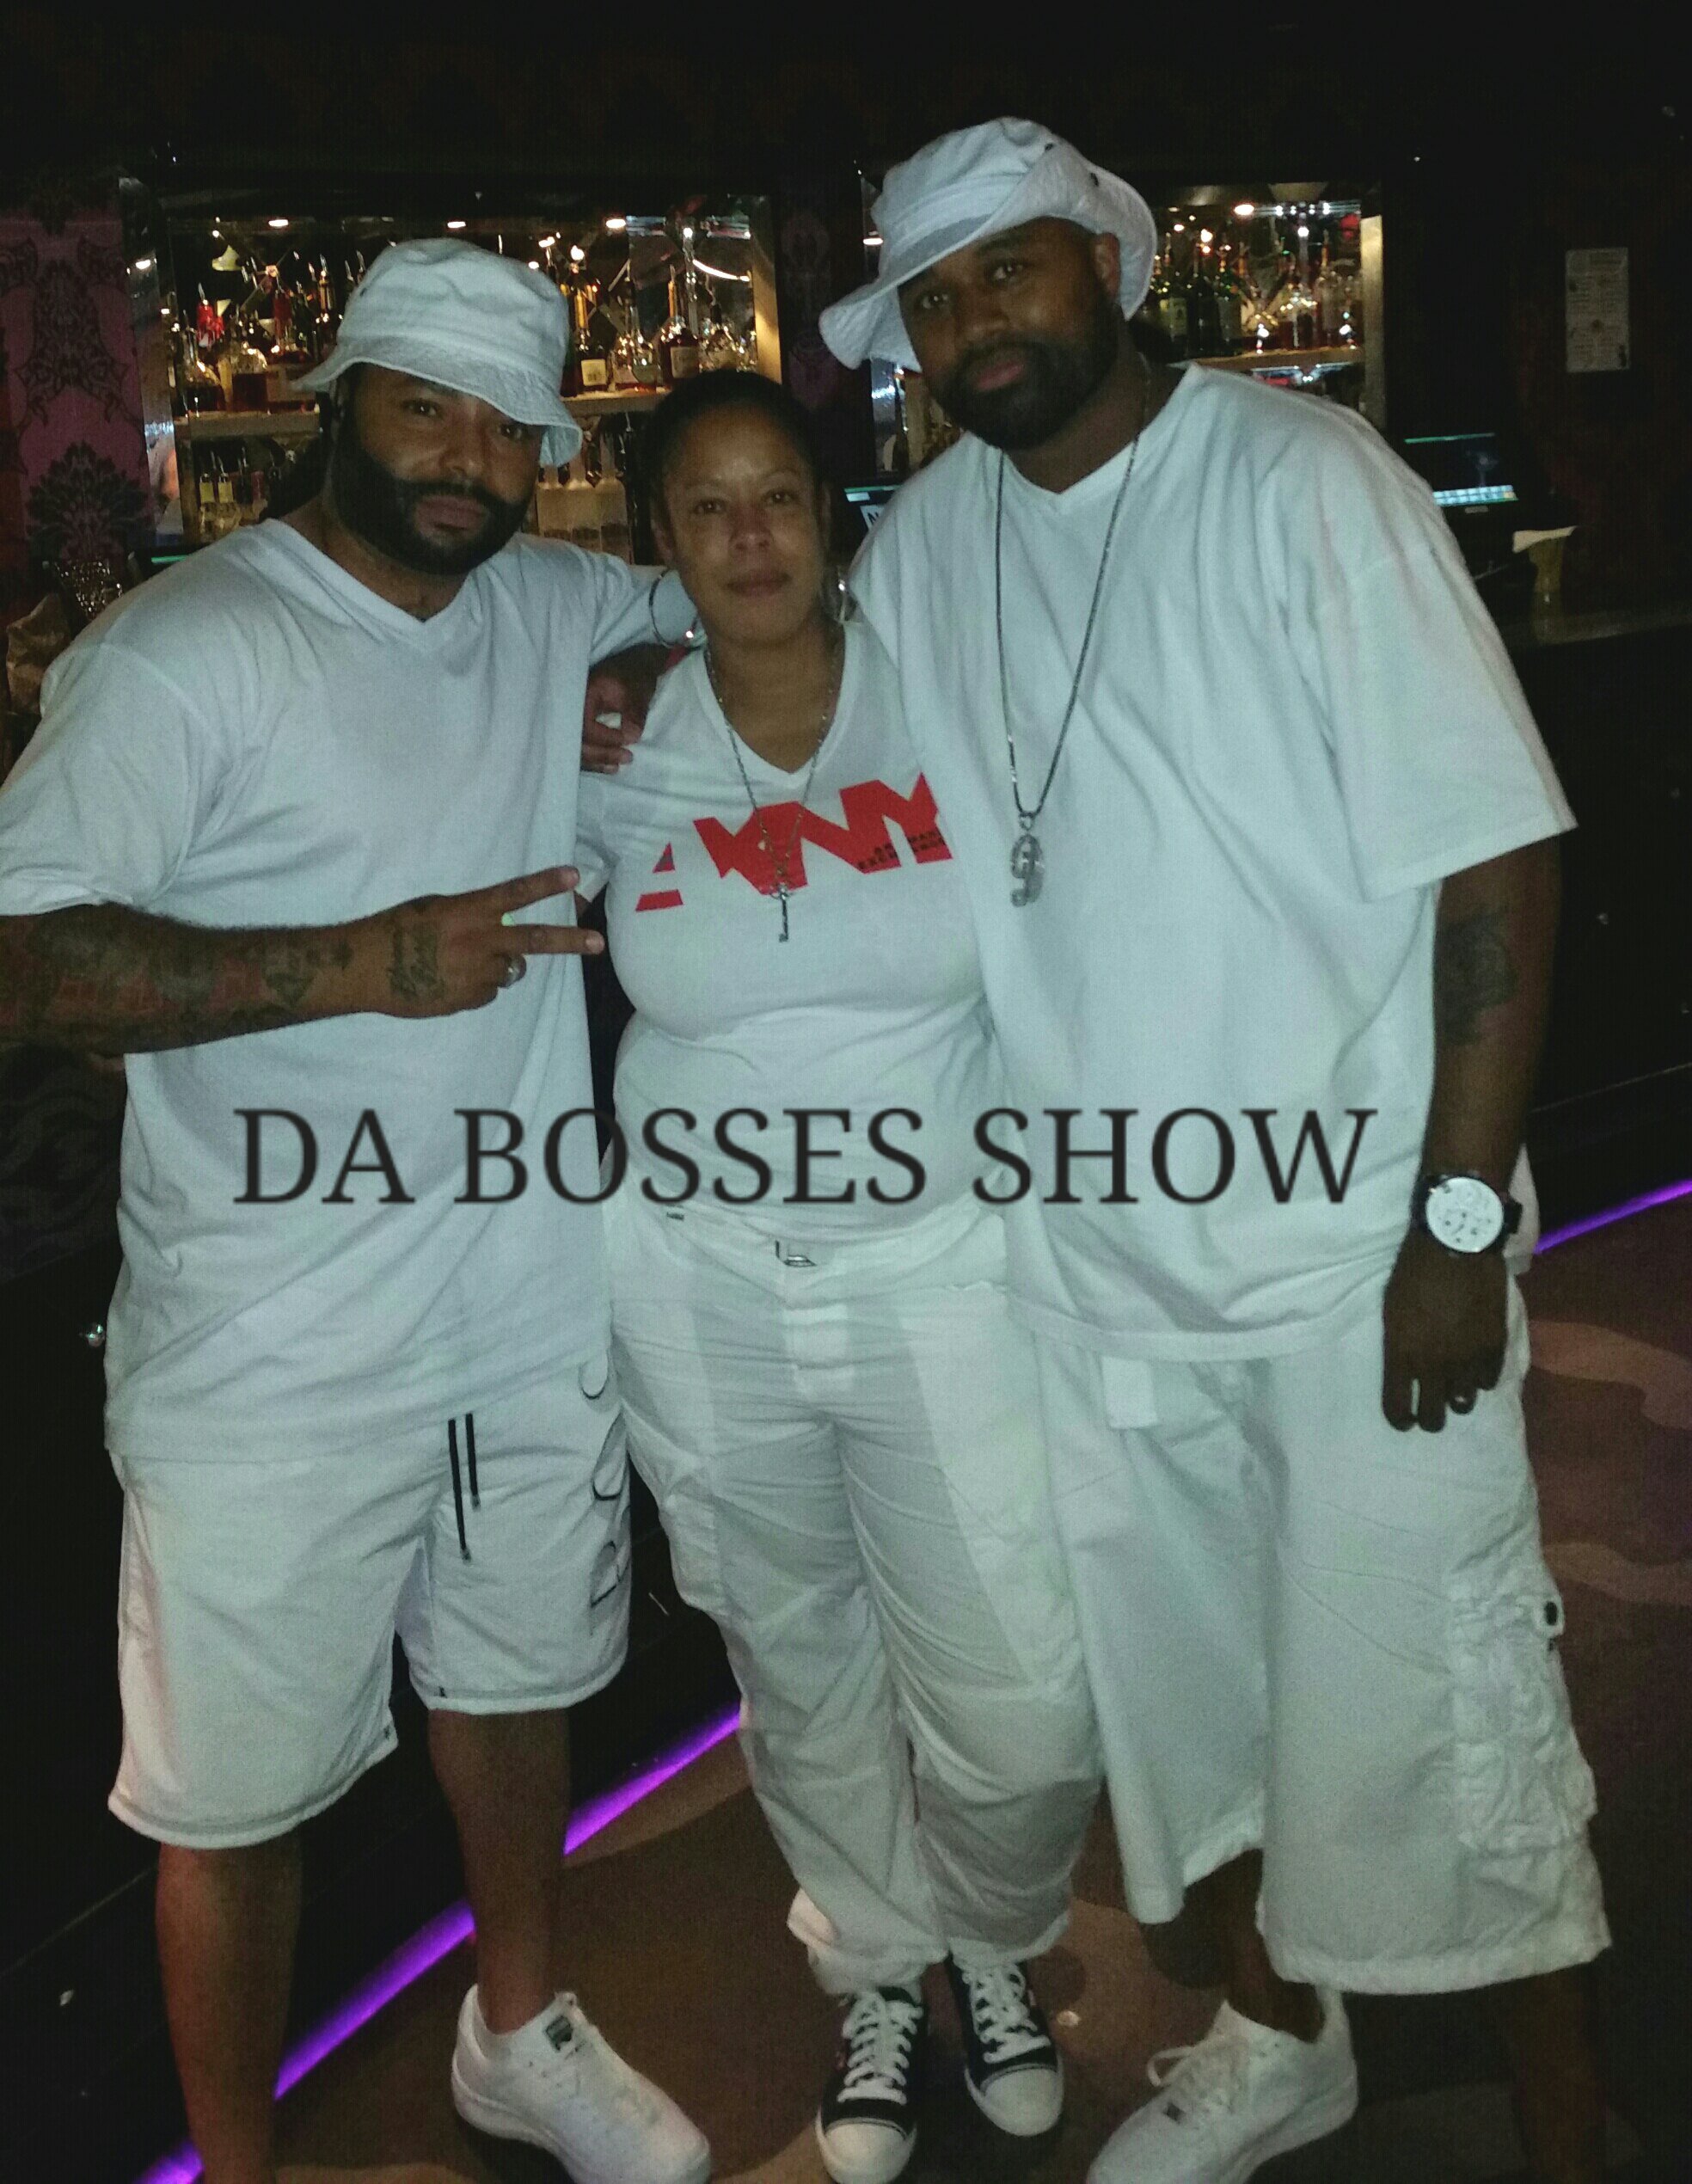 DA BOSSES SHOW LIVE & UNCUTT BRINGING D.C. GO-GO MUSIC TO YOU RAW & UNCUTT.....FROM CLUB TO CLUB HERE WE COME! FOLLW THE MOVEMENT @AUTHENTIC202